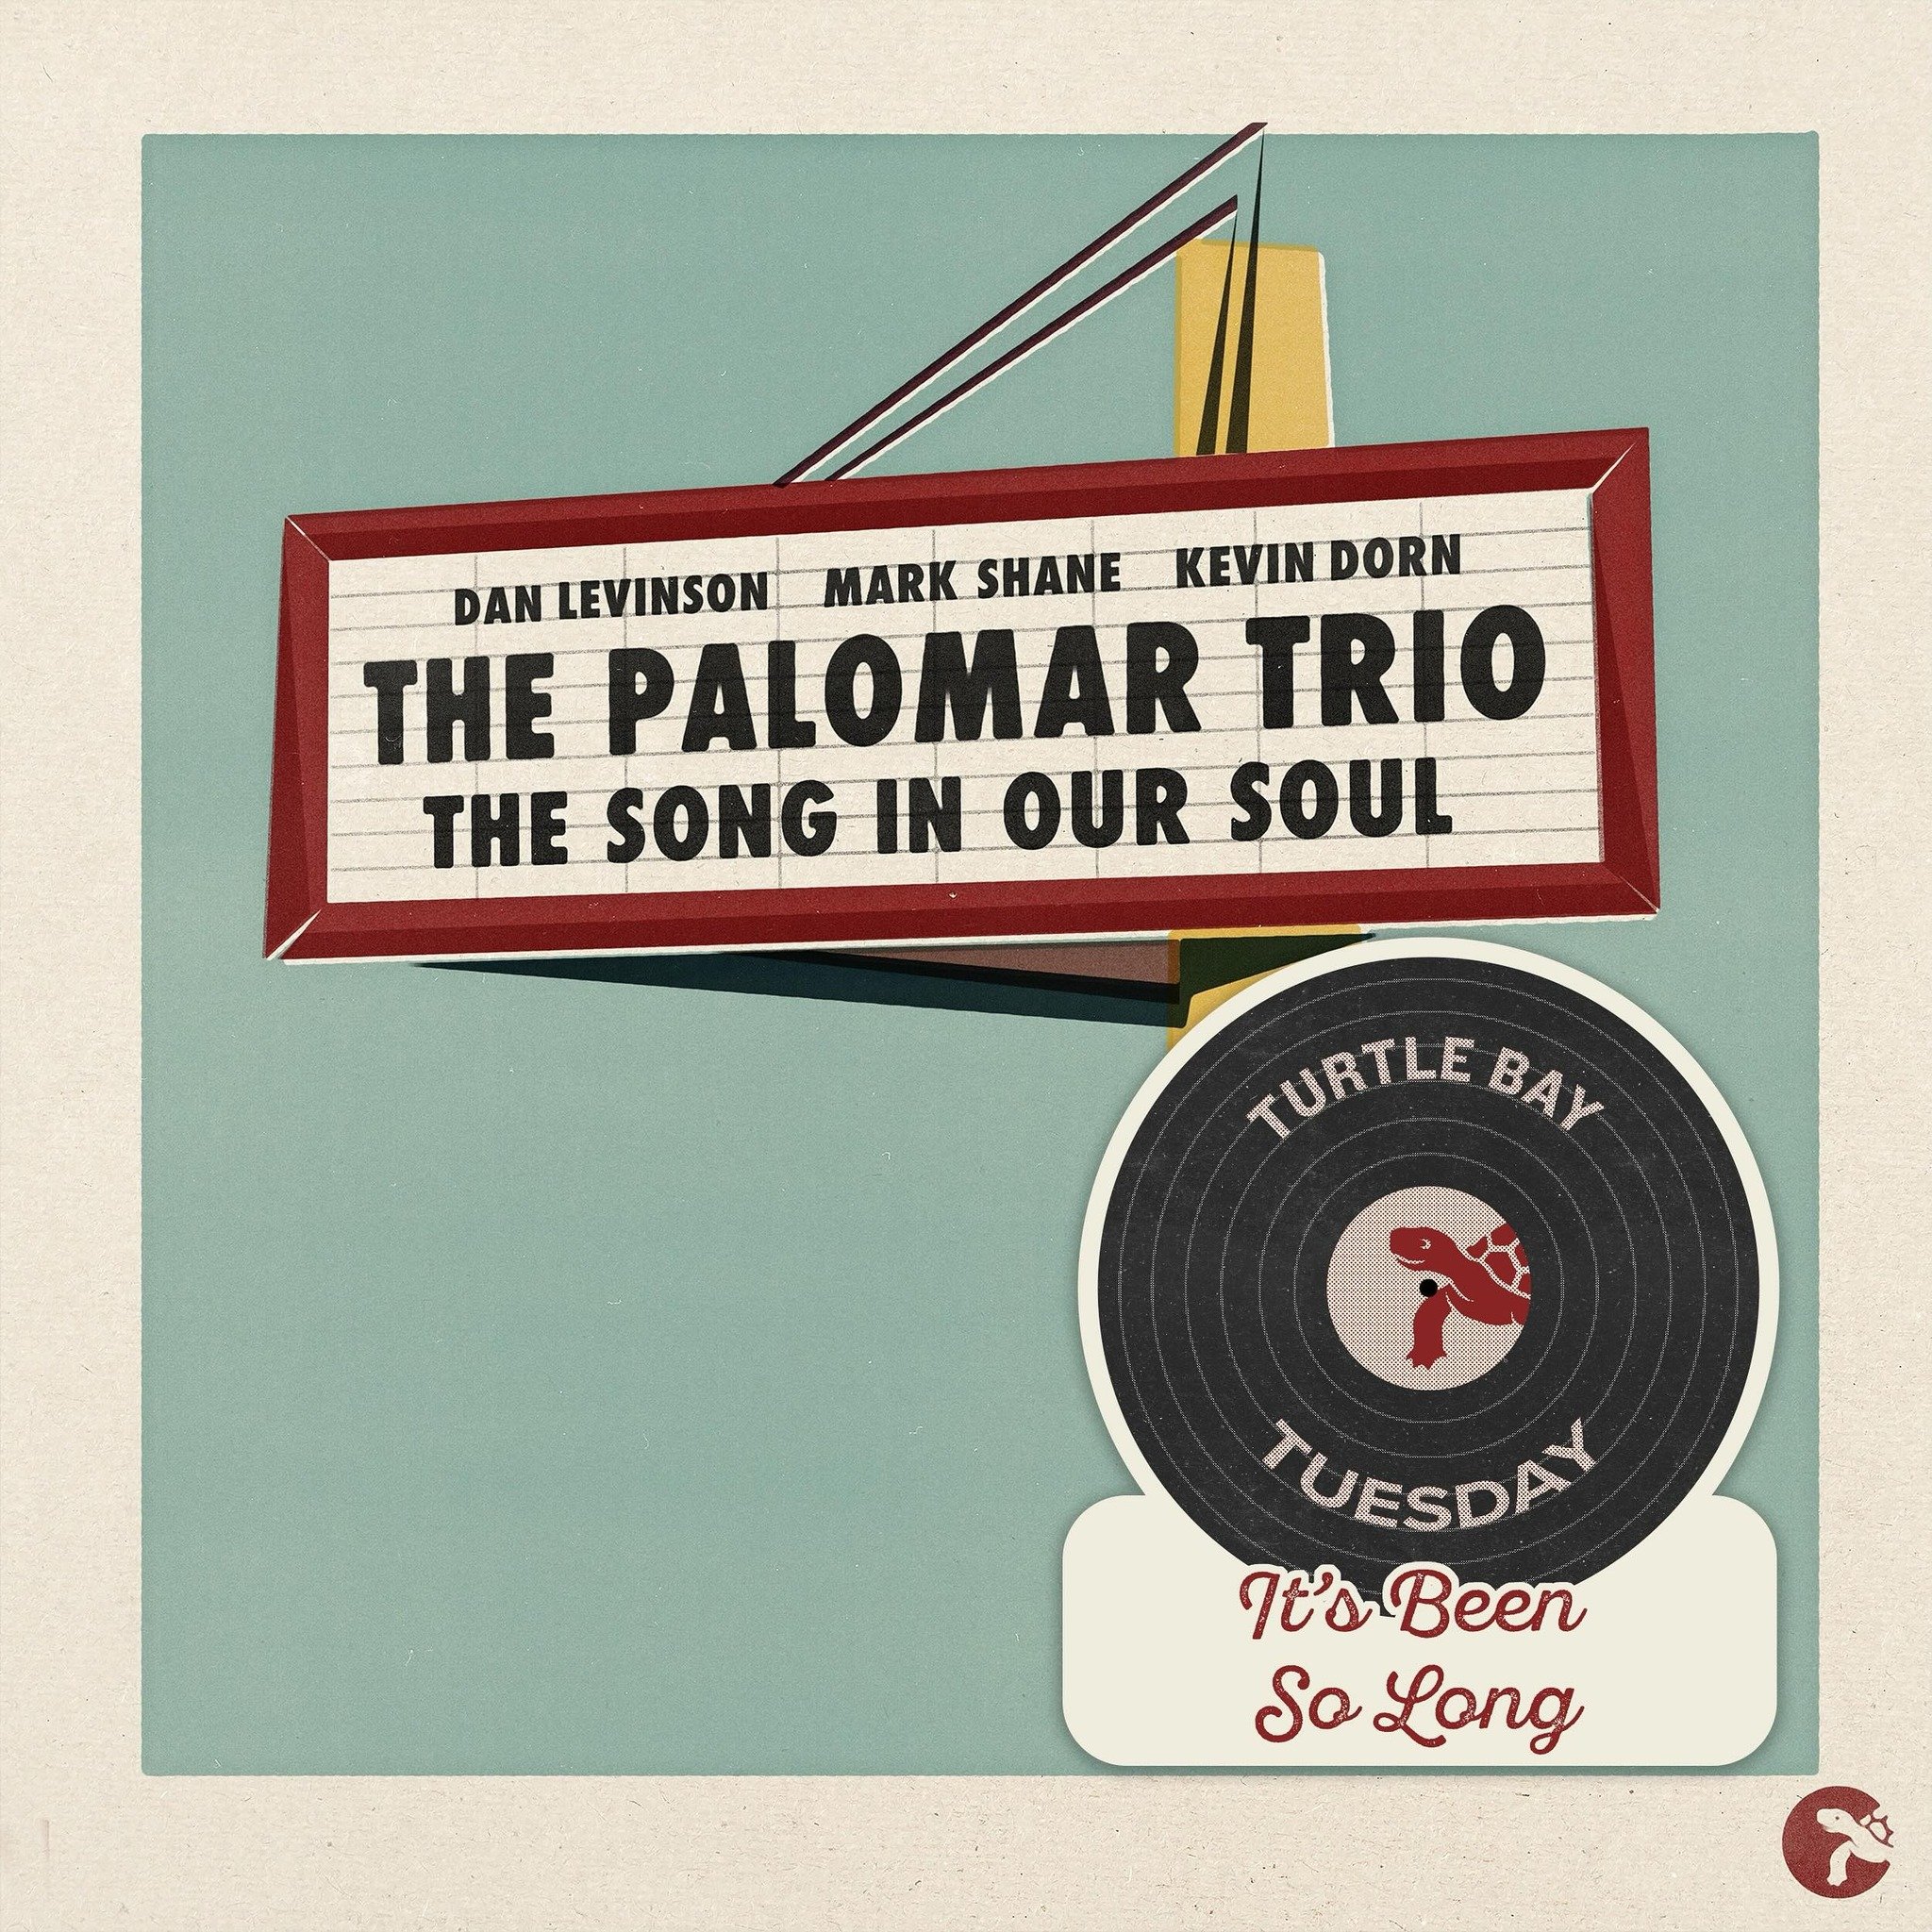 This weeks #turtlebaytuesday is &lsquo;It&rsquo;s Been So Long&rsquo; by The Palomar Trio. You can listen on your favorite streaming service, or better still, go to turtlebayrecords.com to buy the album and shop the whole catalogue. 
.
.
.
.
#turtleb